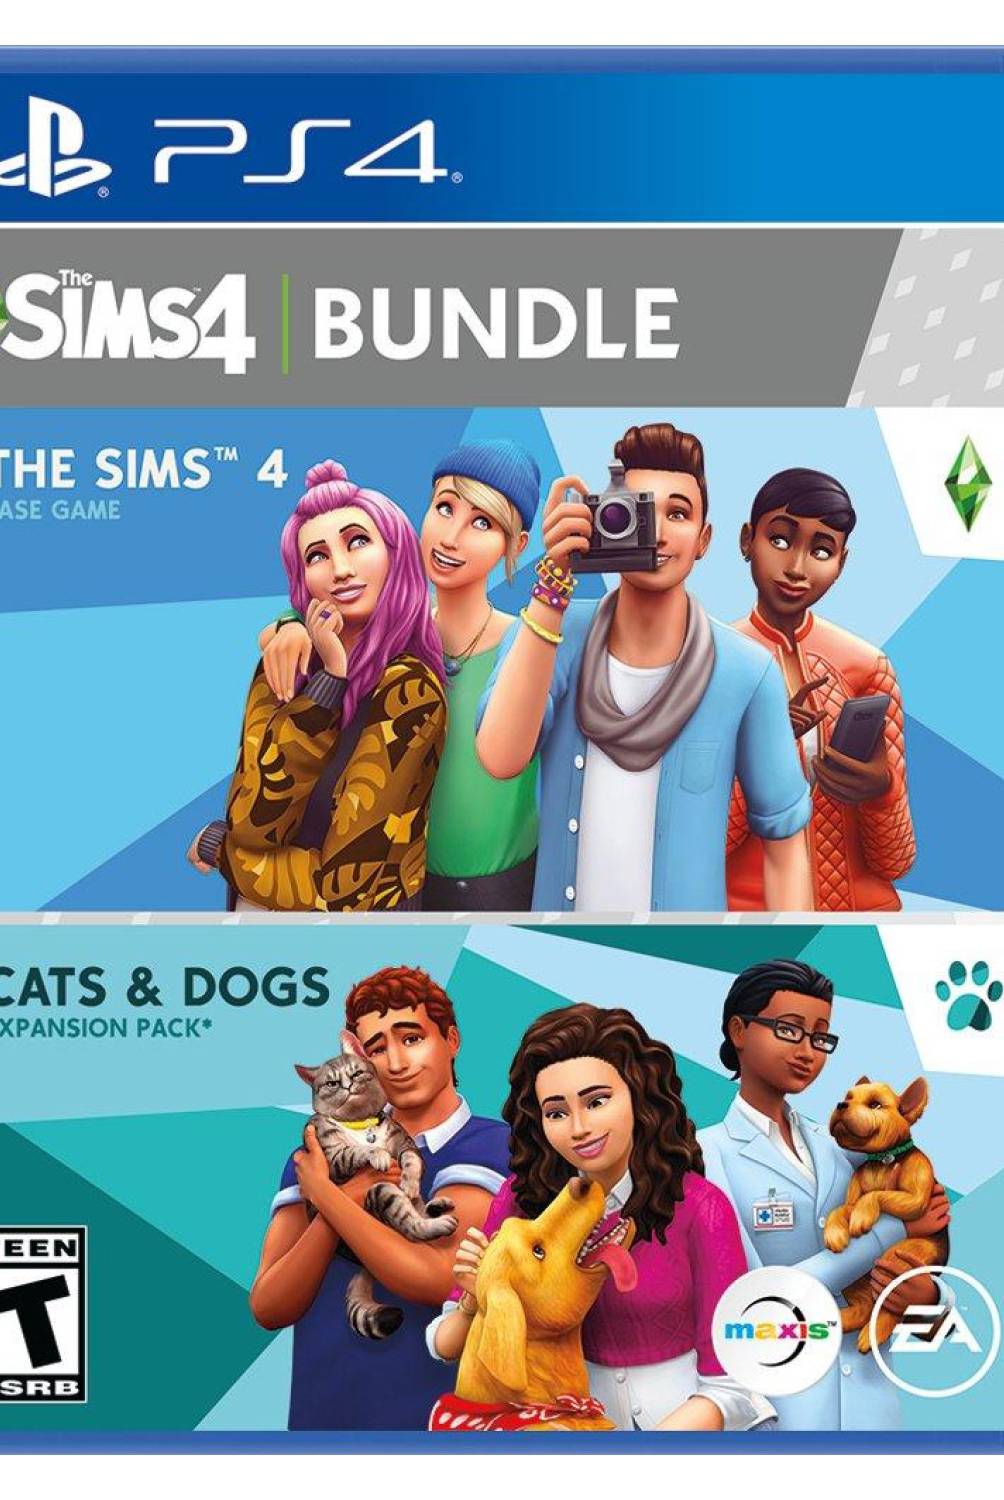 ELECTRONIC ARTS - THE SIMS 4 PLUS CATS DOGS BUNDLE REFRESH PS4